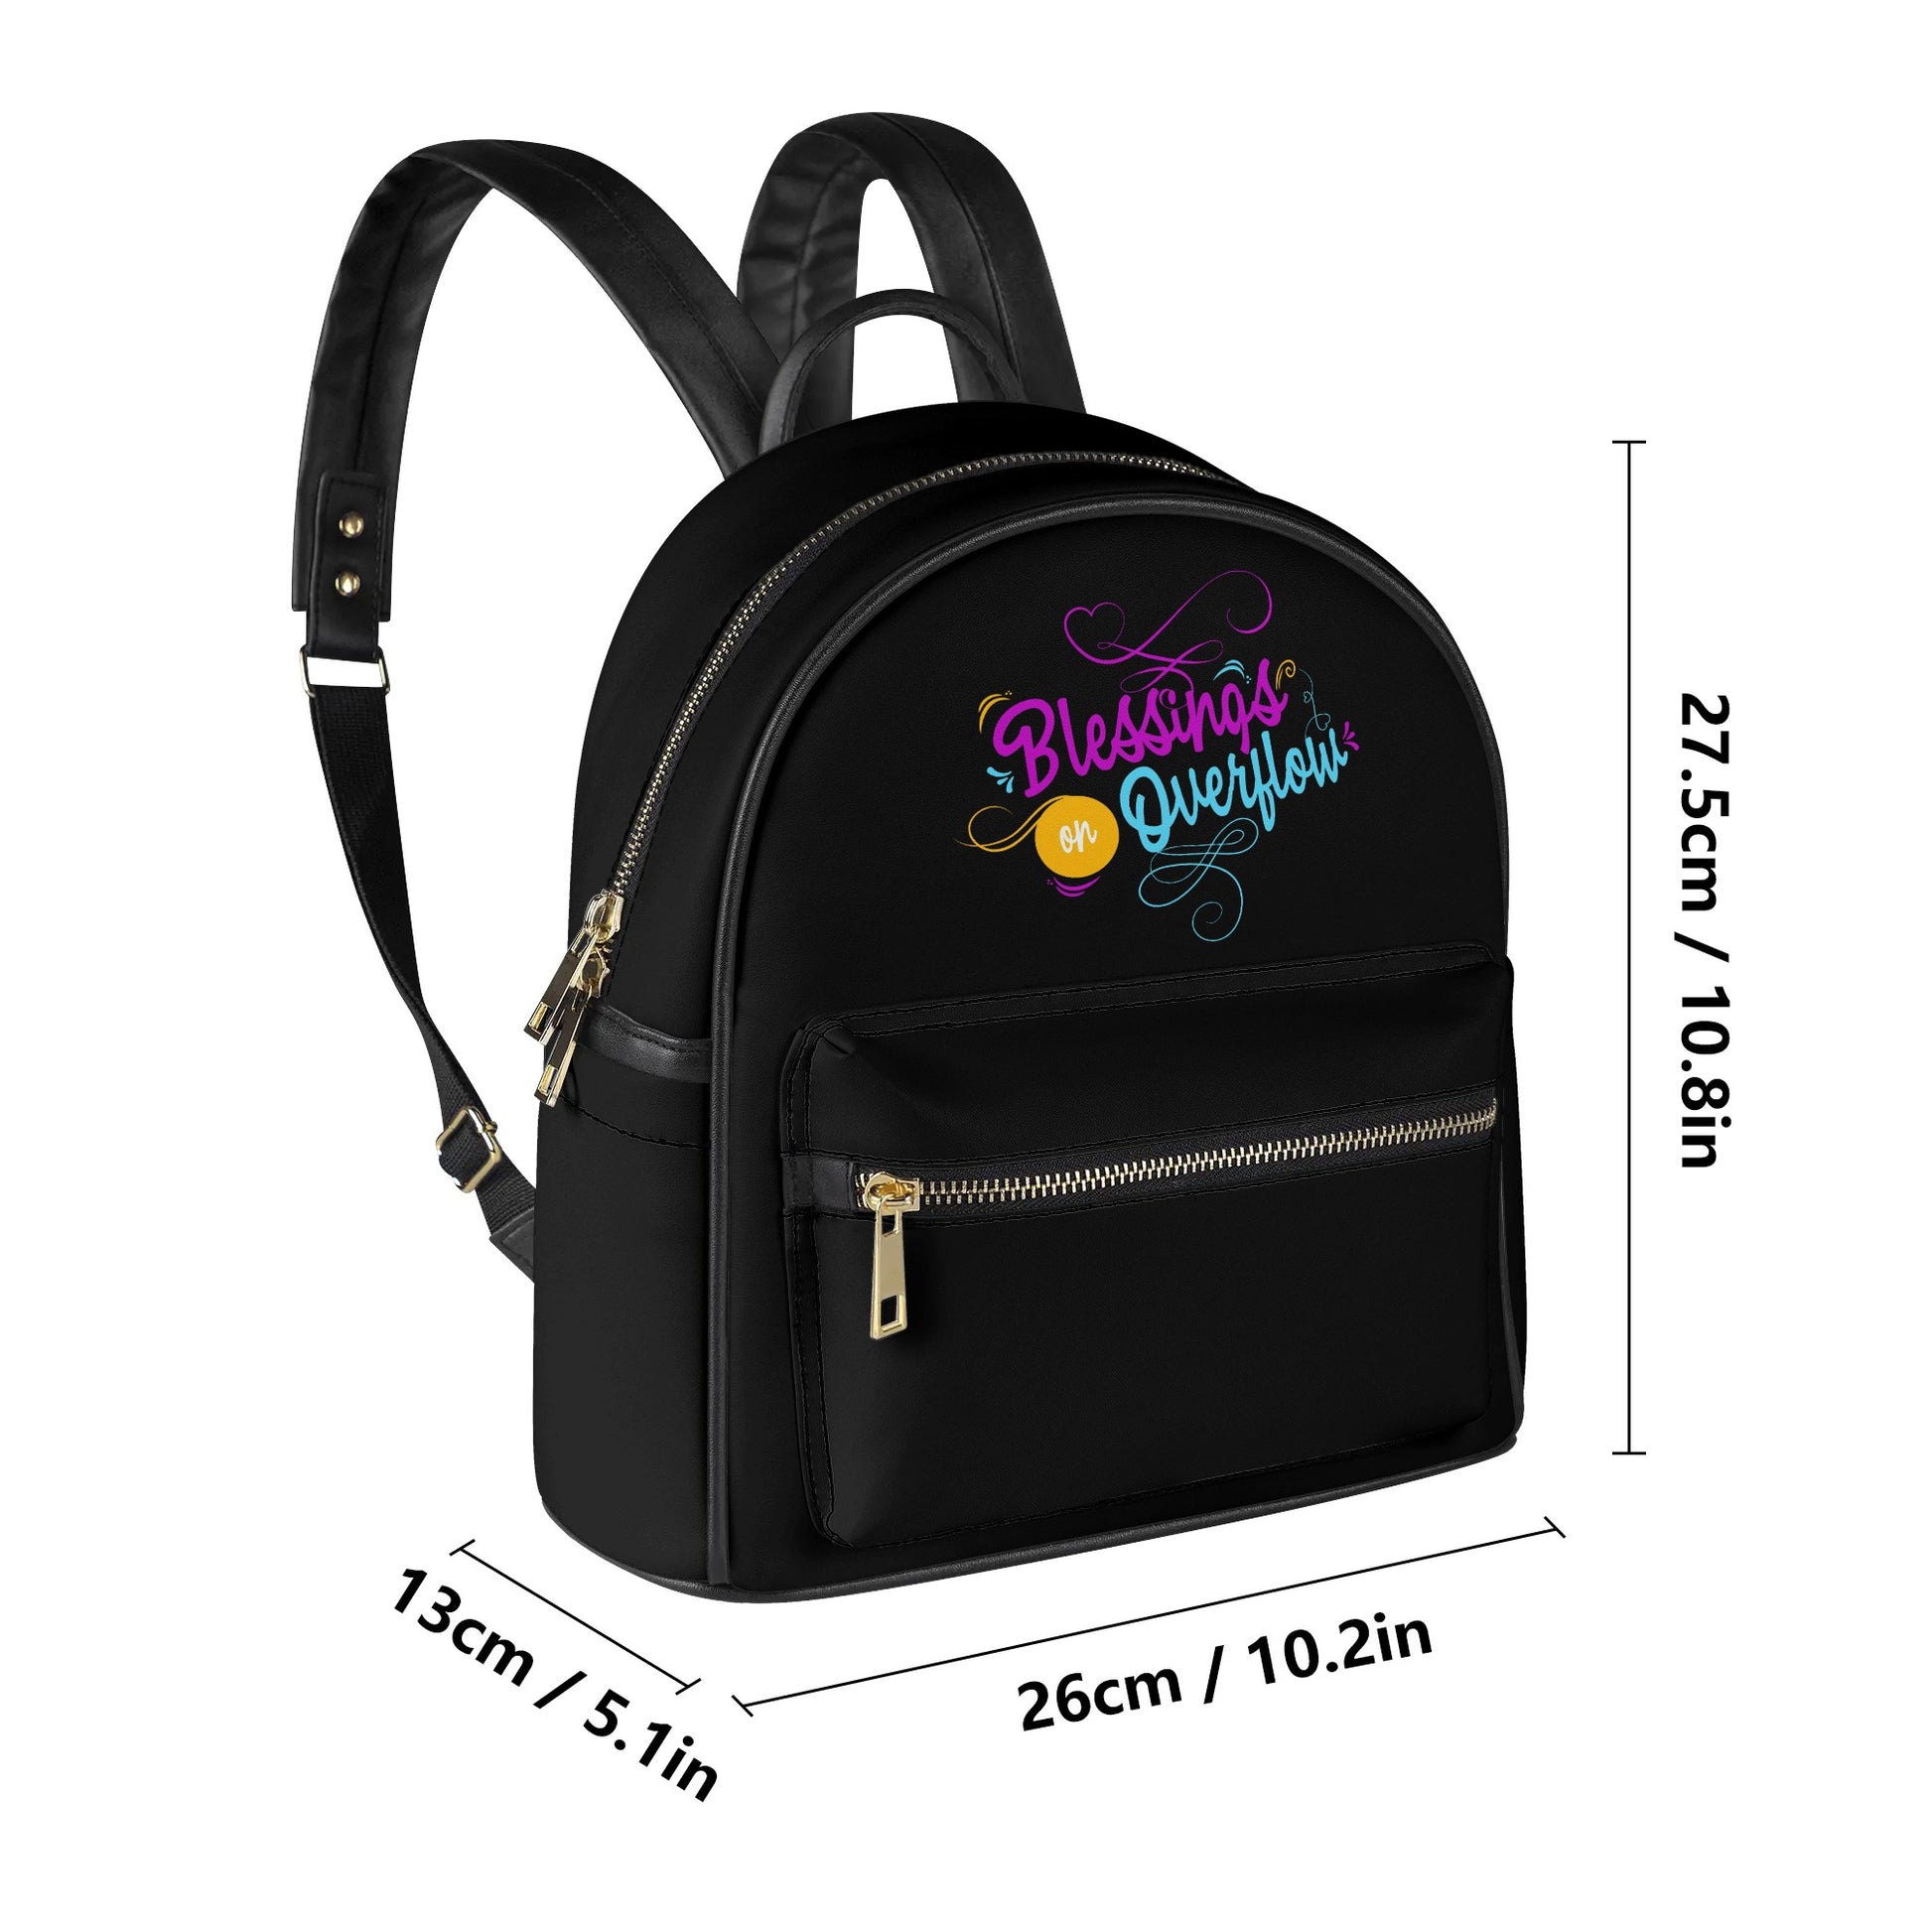 Blessings on Overflow Christian Casual PU Leather Backpack popcustoms